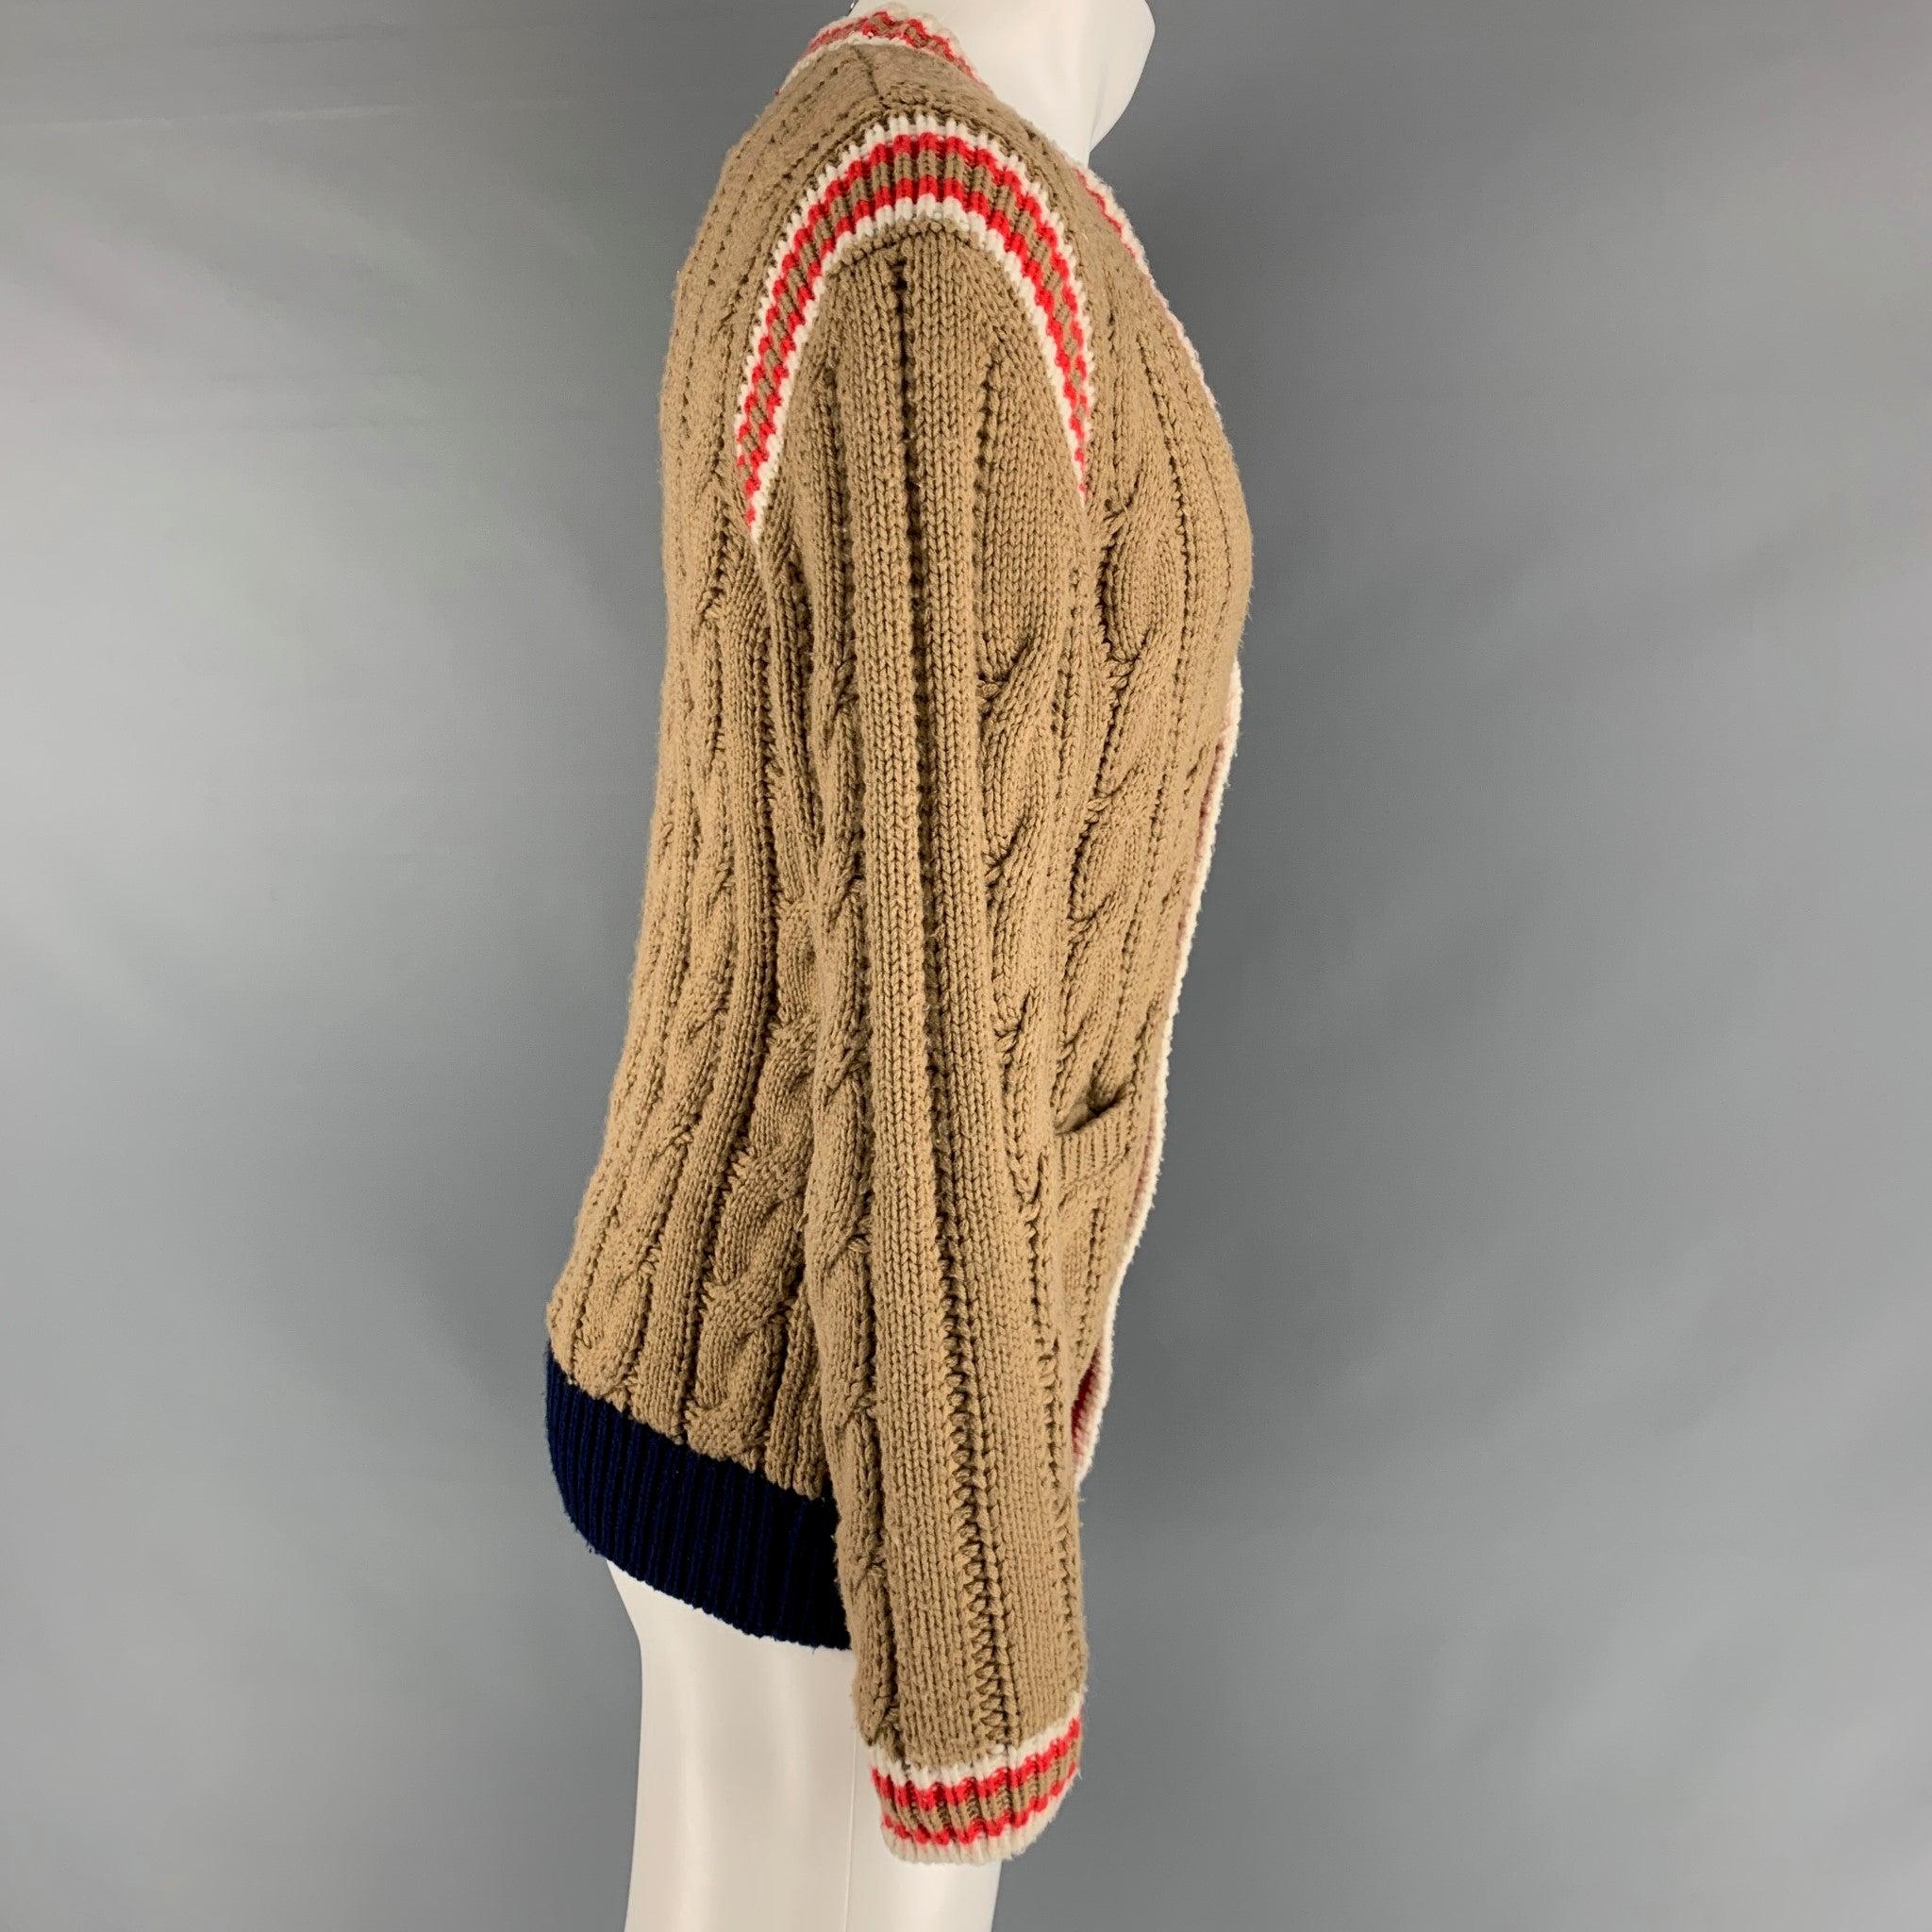 GUCCI cardigan comes in a brown wool knit material featuring V-neck, coral details, cable knit, and a buttoned closure. Made in Italy.Good Pre-Owned Condition. Moderate signs of wear. As Is. 

Marked:   S 

Measurements: 
 
Shoulder: 18 inches